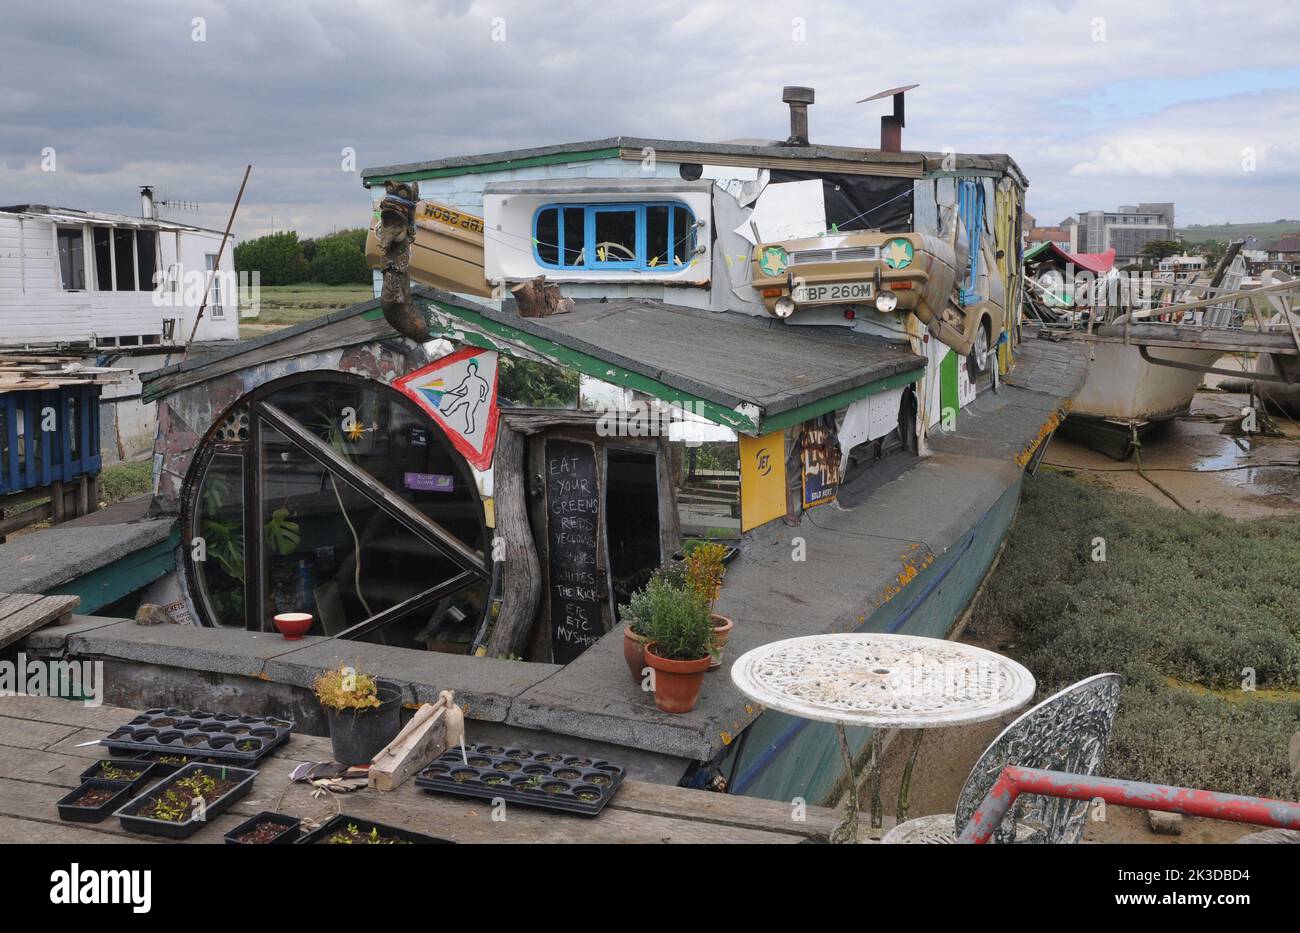 HOUSEBOATS AT SHOREHAM WEST SUSSEX. PIC MIKE WALKER 2015 Stock Photo